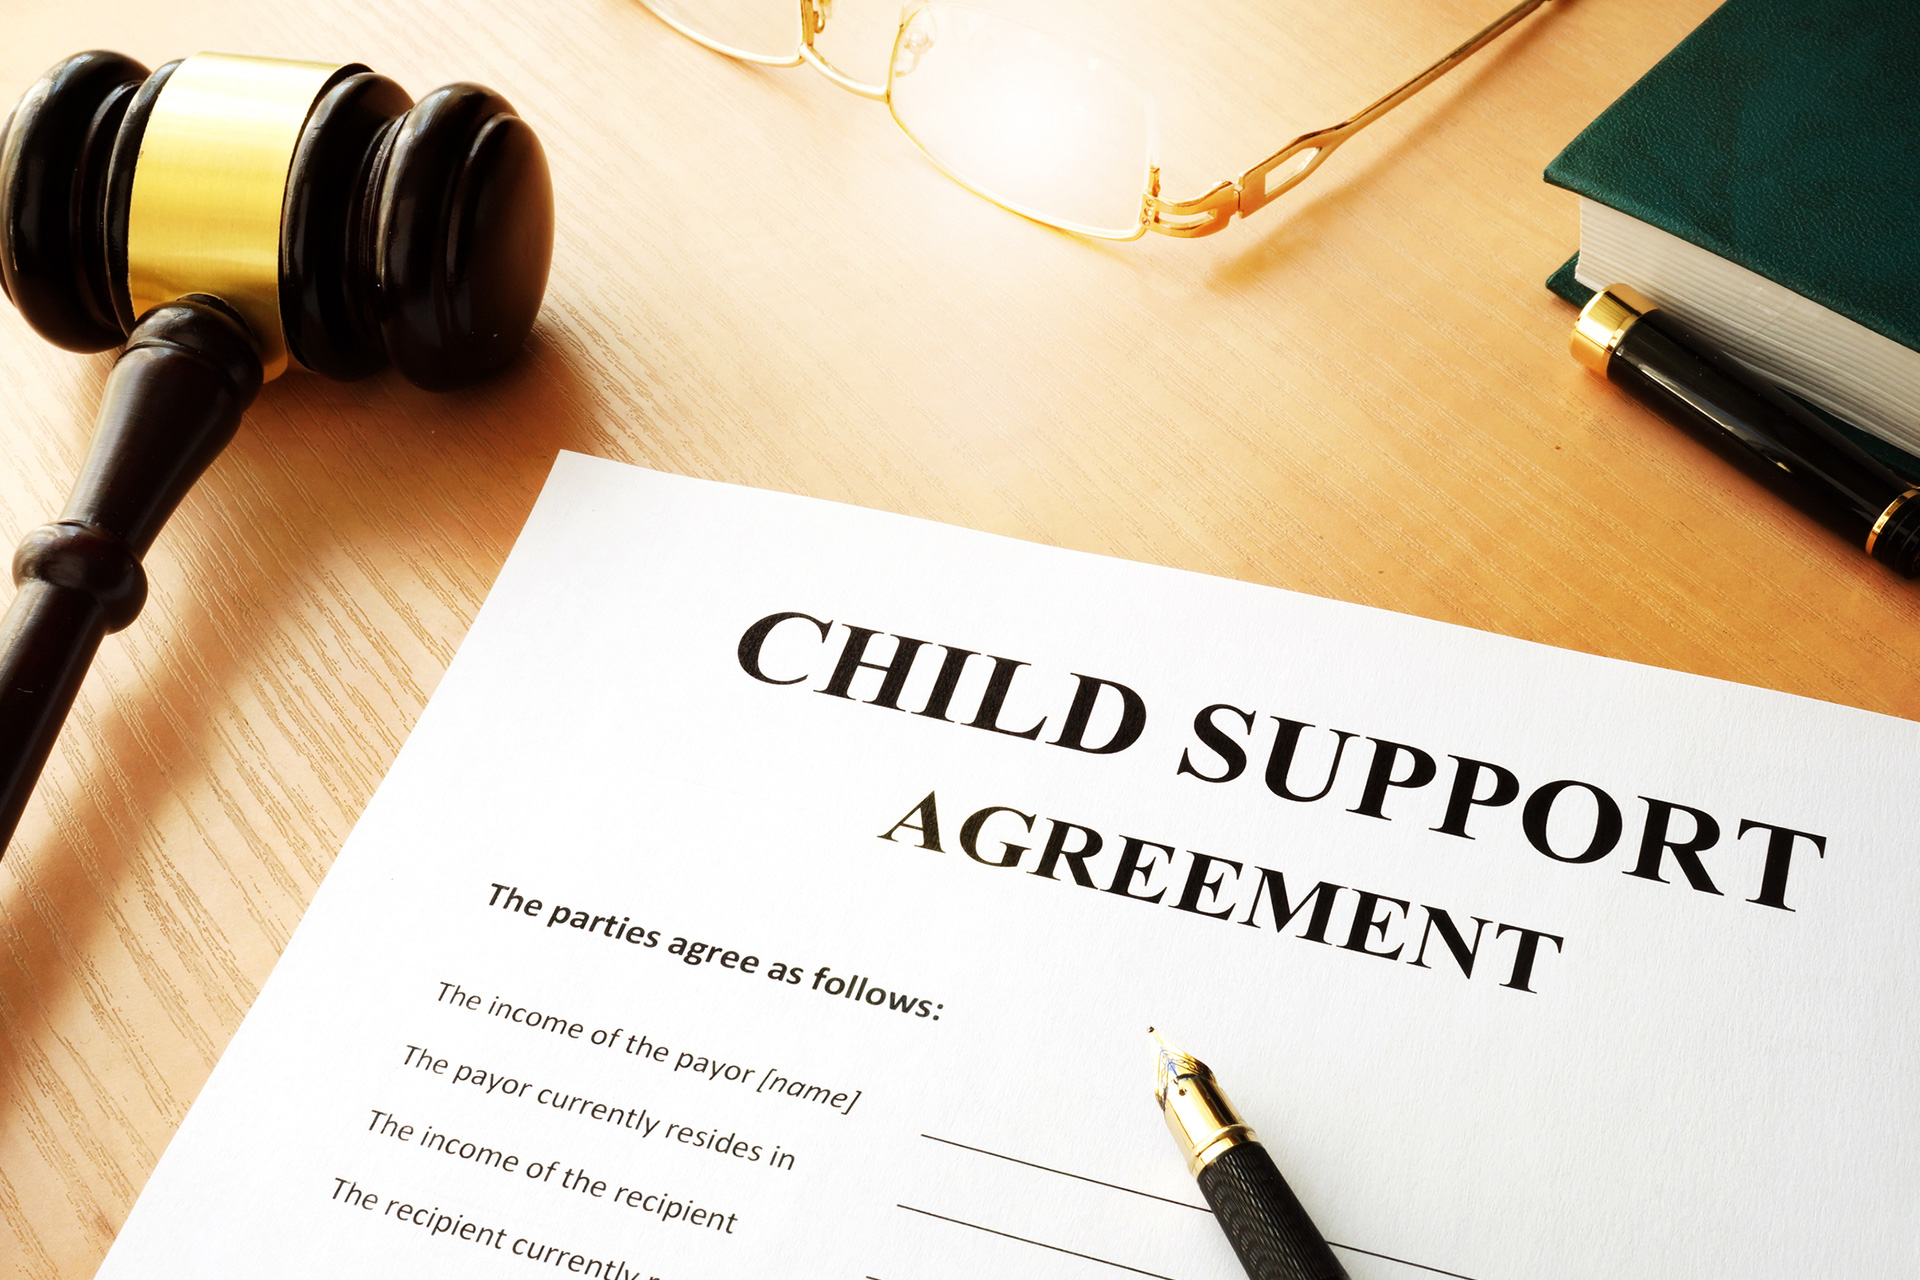 How Do I Know if My Texas Child Support Order is Fair?